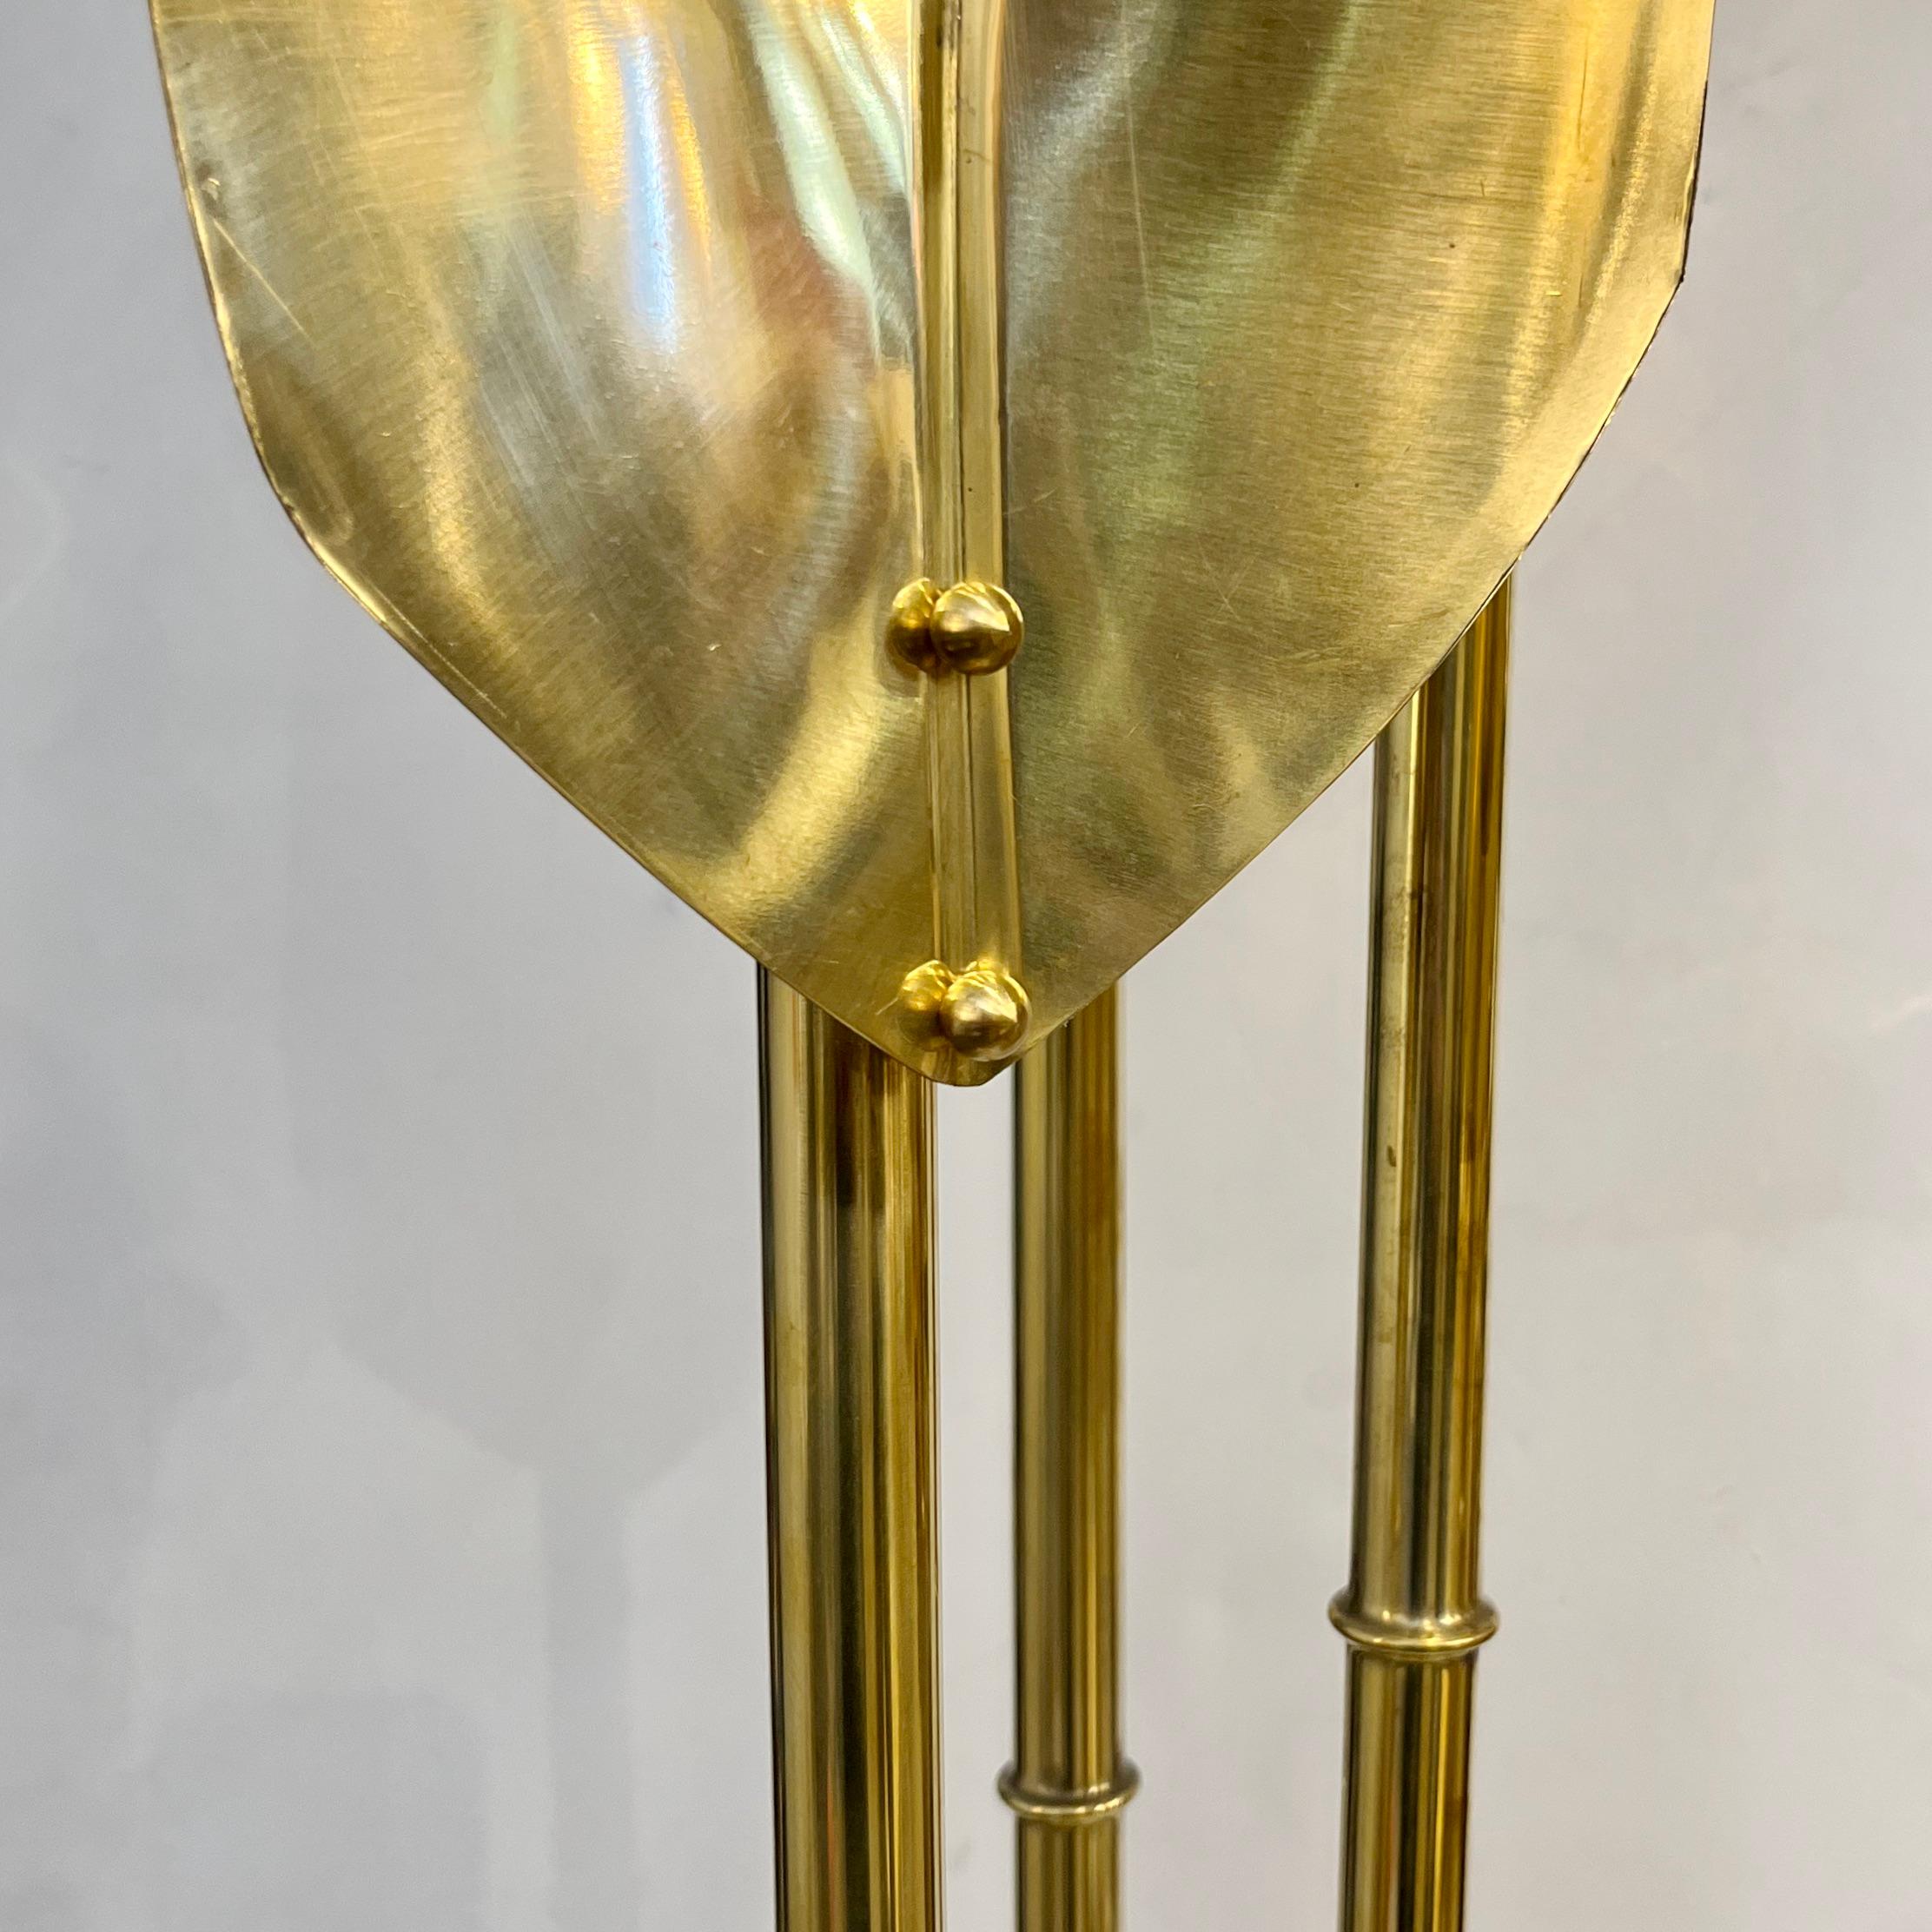 Contemporary Italian Art Deco Design Palm Tree Pair of 7-Leaf Brass Floor Lamps For Sale 8